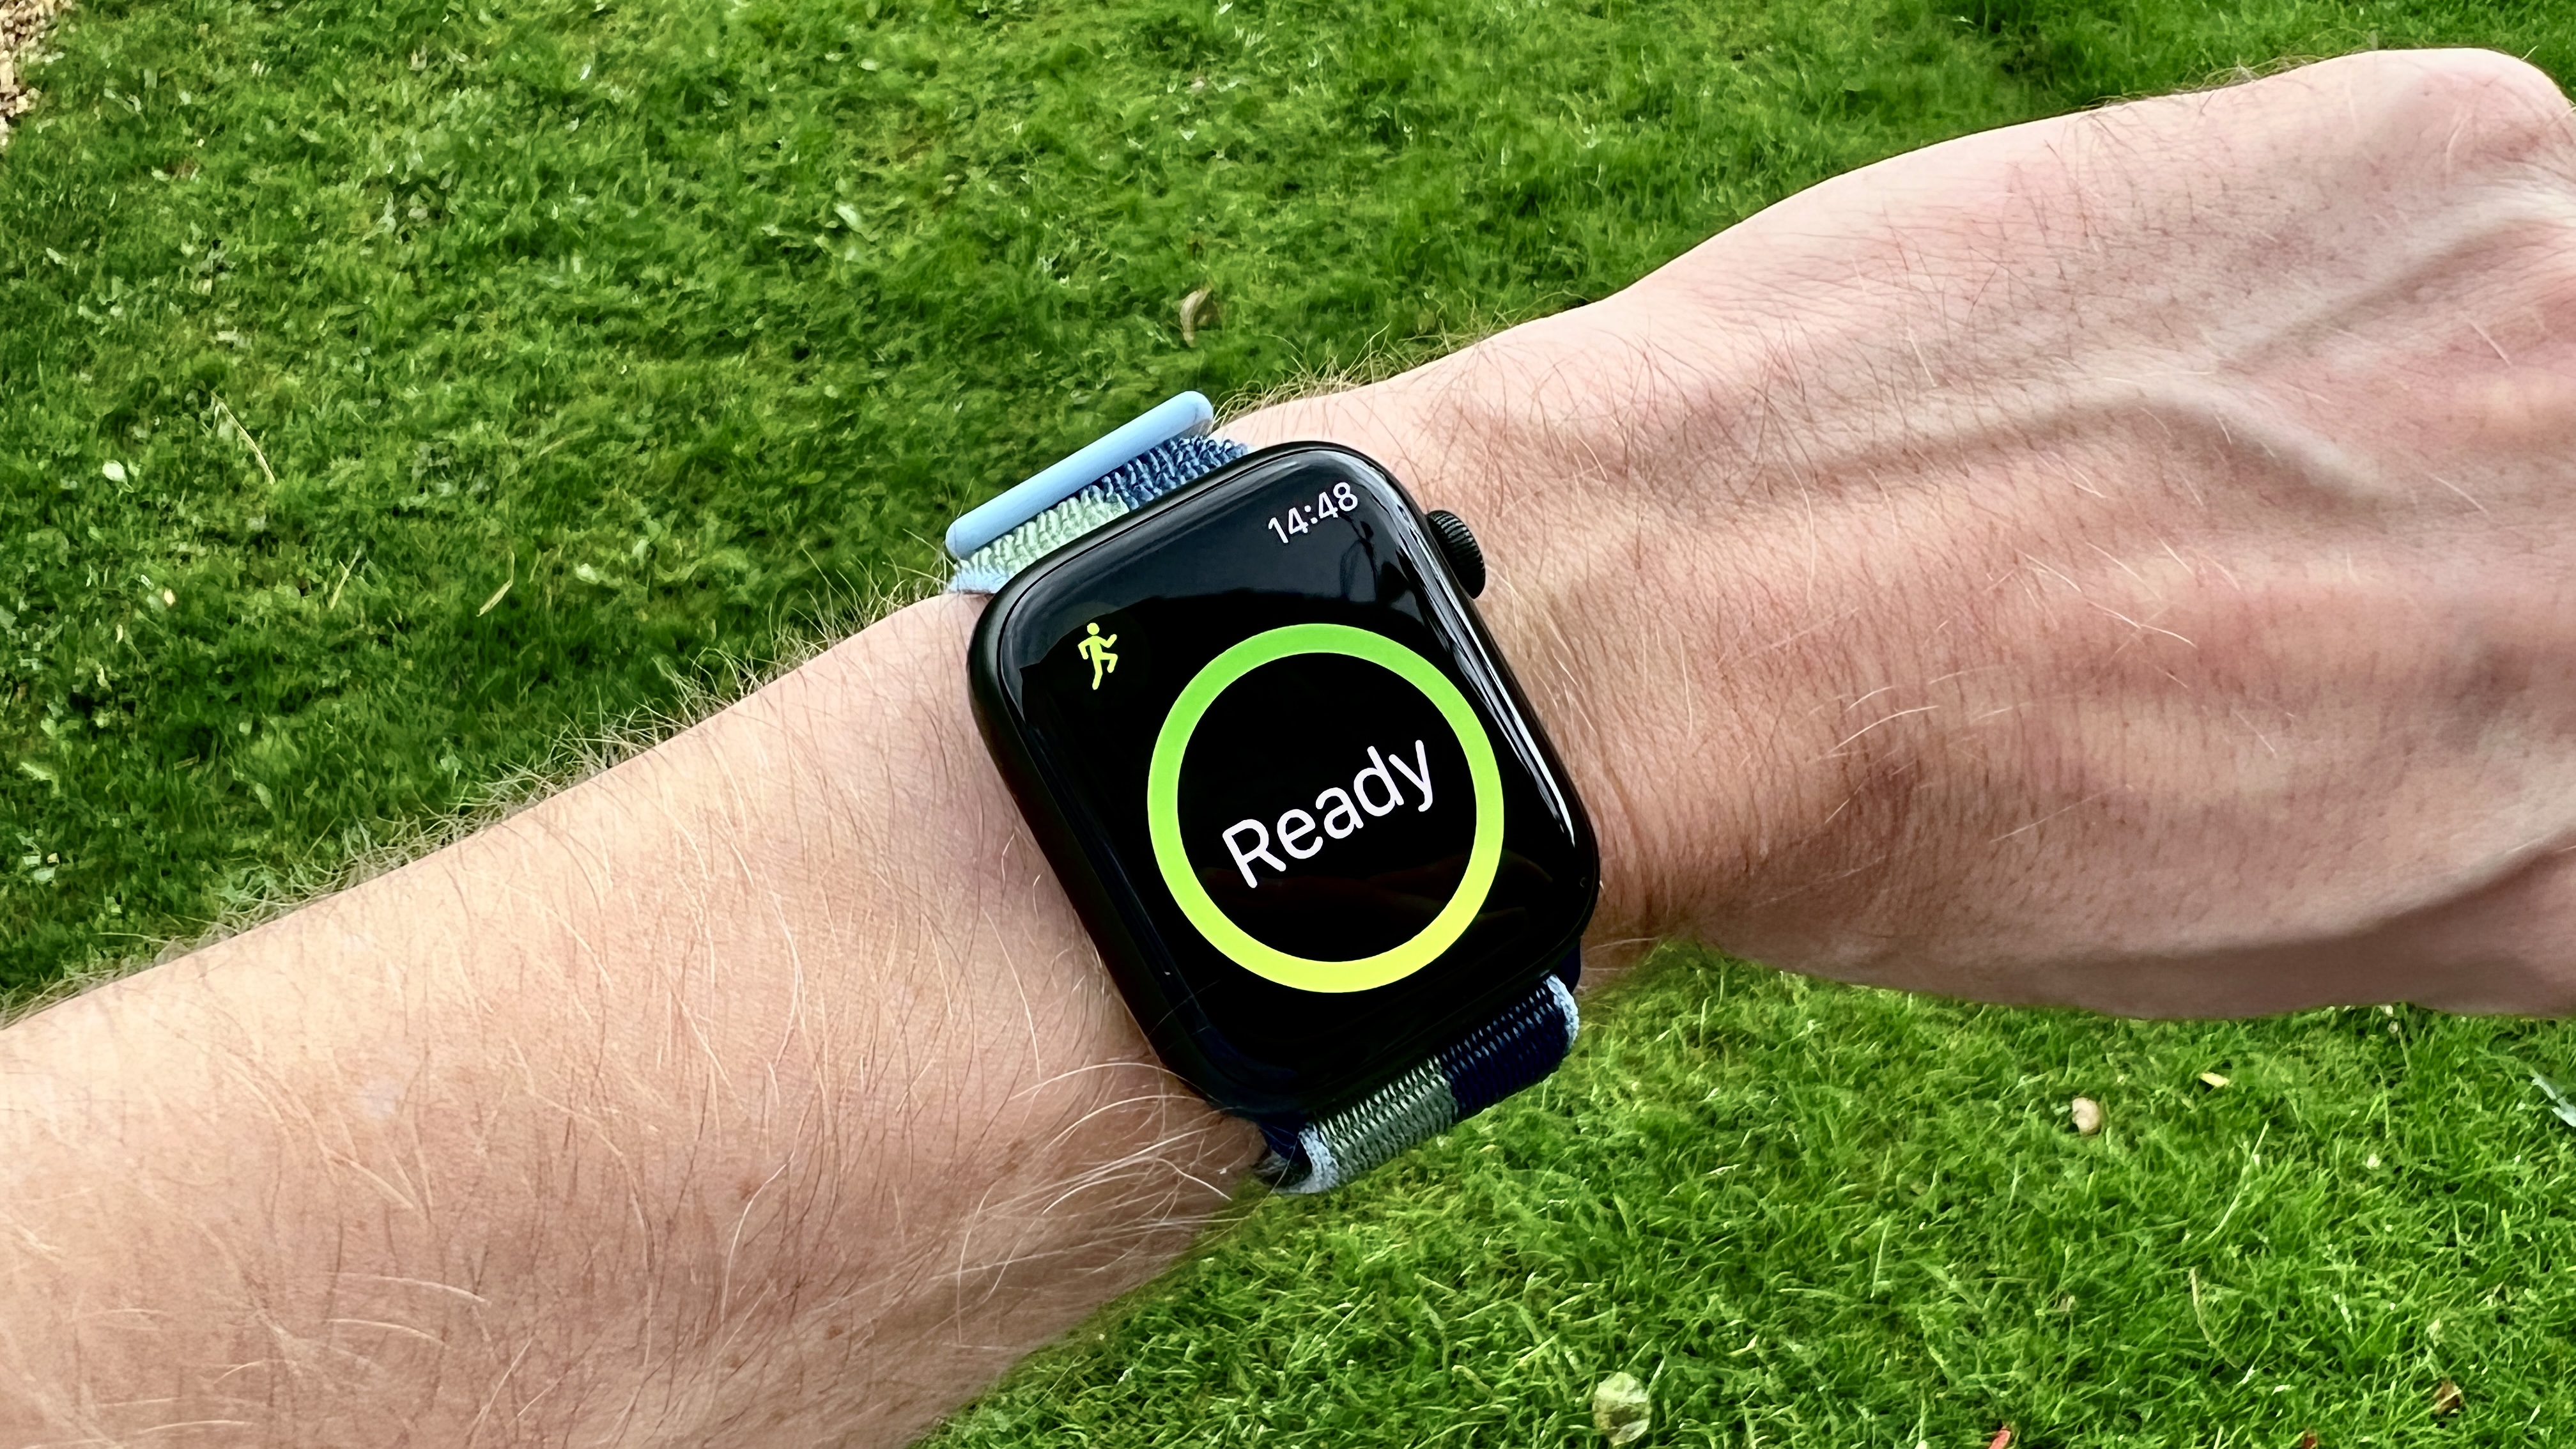 Apple Watch Series 7 images of the watch in test